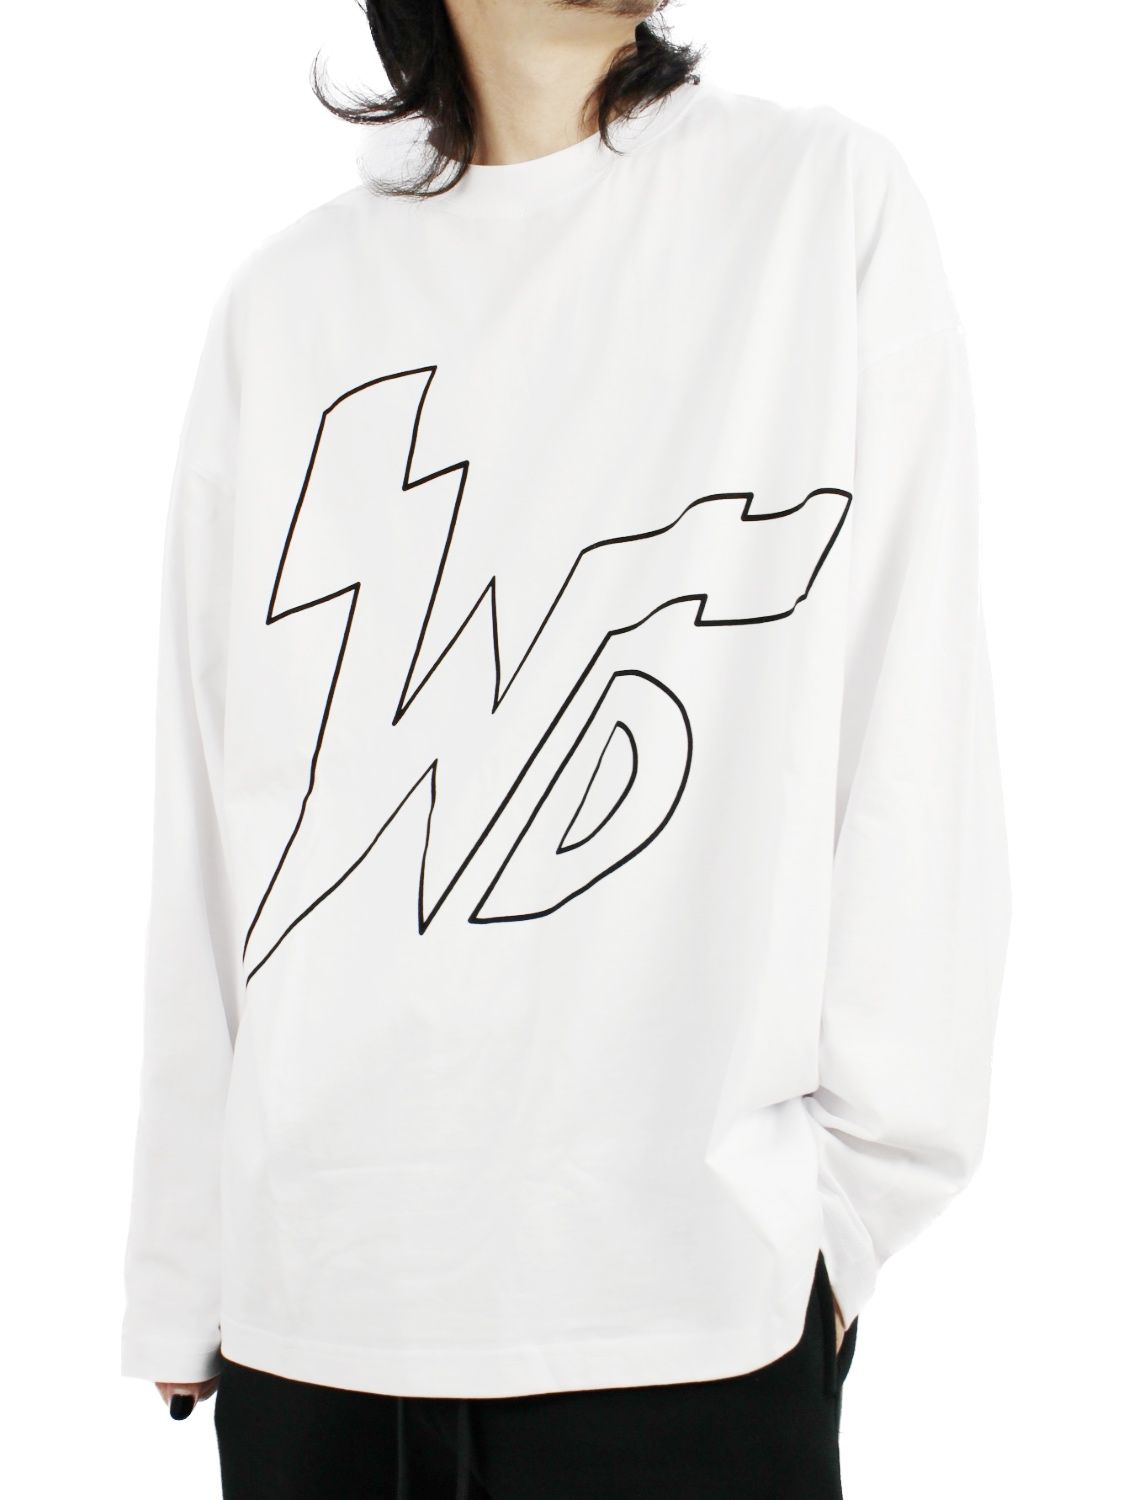 WE11DONE - 【22AW】サンダー WDロゴ ロングスリーブ Tシャツ